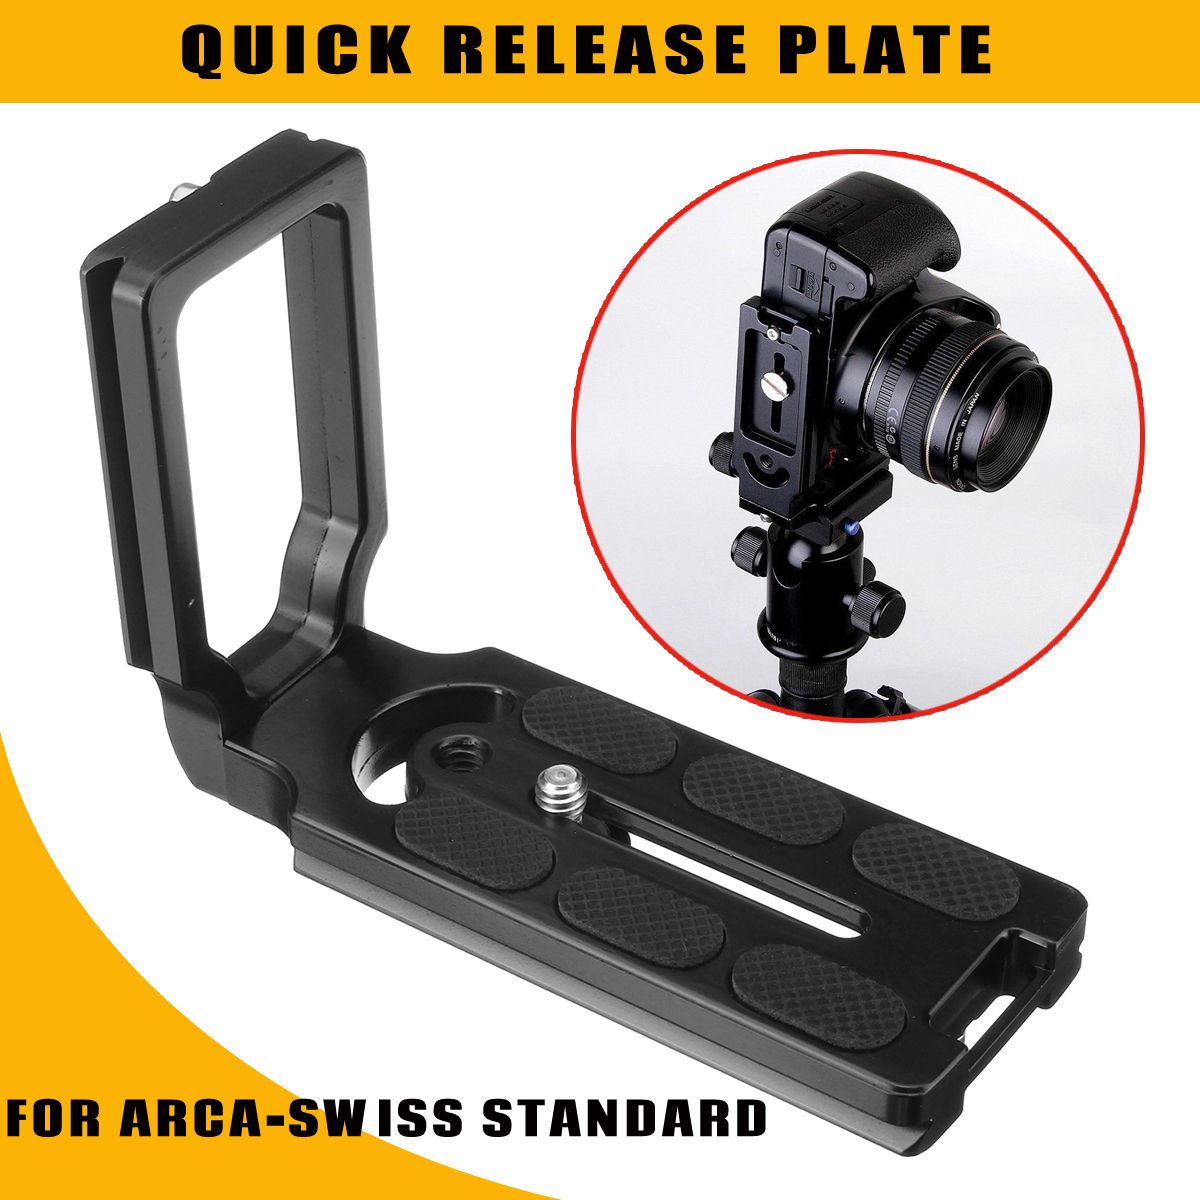 MPU-105-L-Shape-Quick-Release-Plate-Bracket-for-Canon-for-Nikon-All-Cameras-with-One-quarter-Screw-1263991